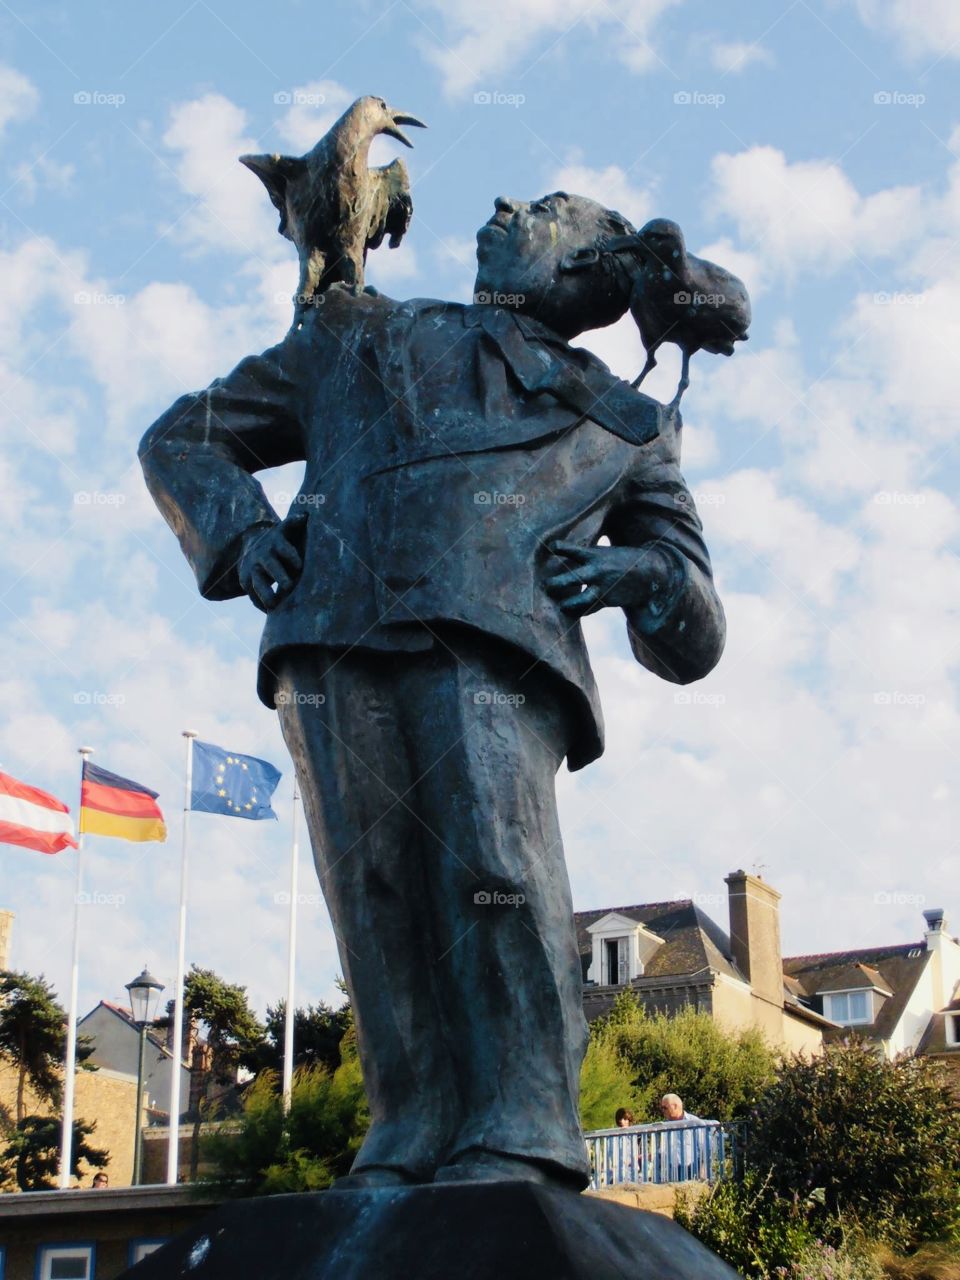 Statue of Hitchcock in Dinard, France